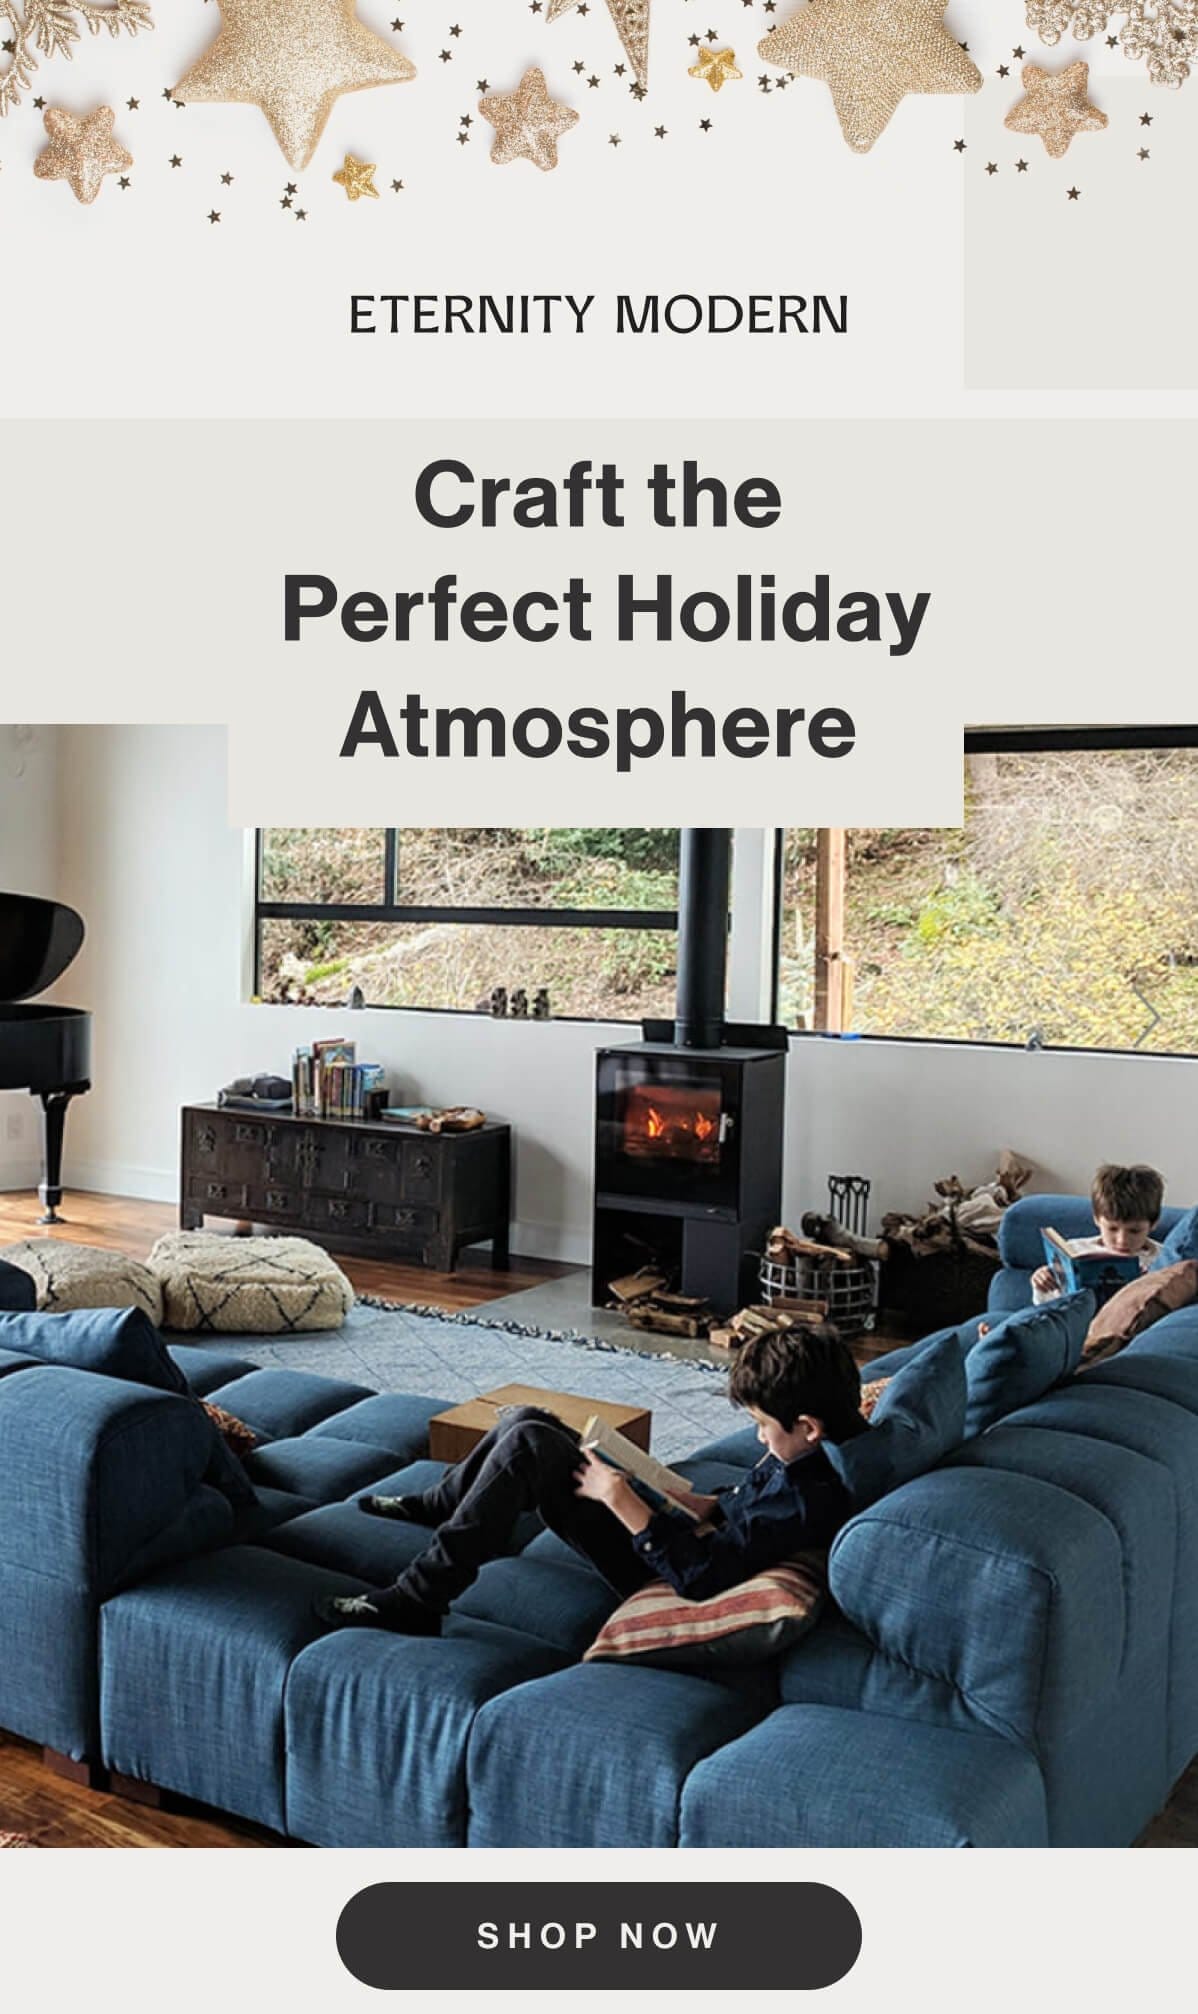 Craft the Perfect Holiday Atmosphere - Shop Now